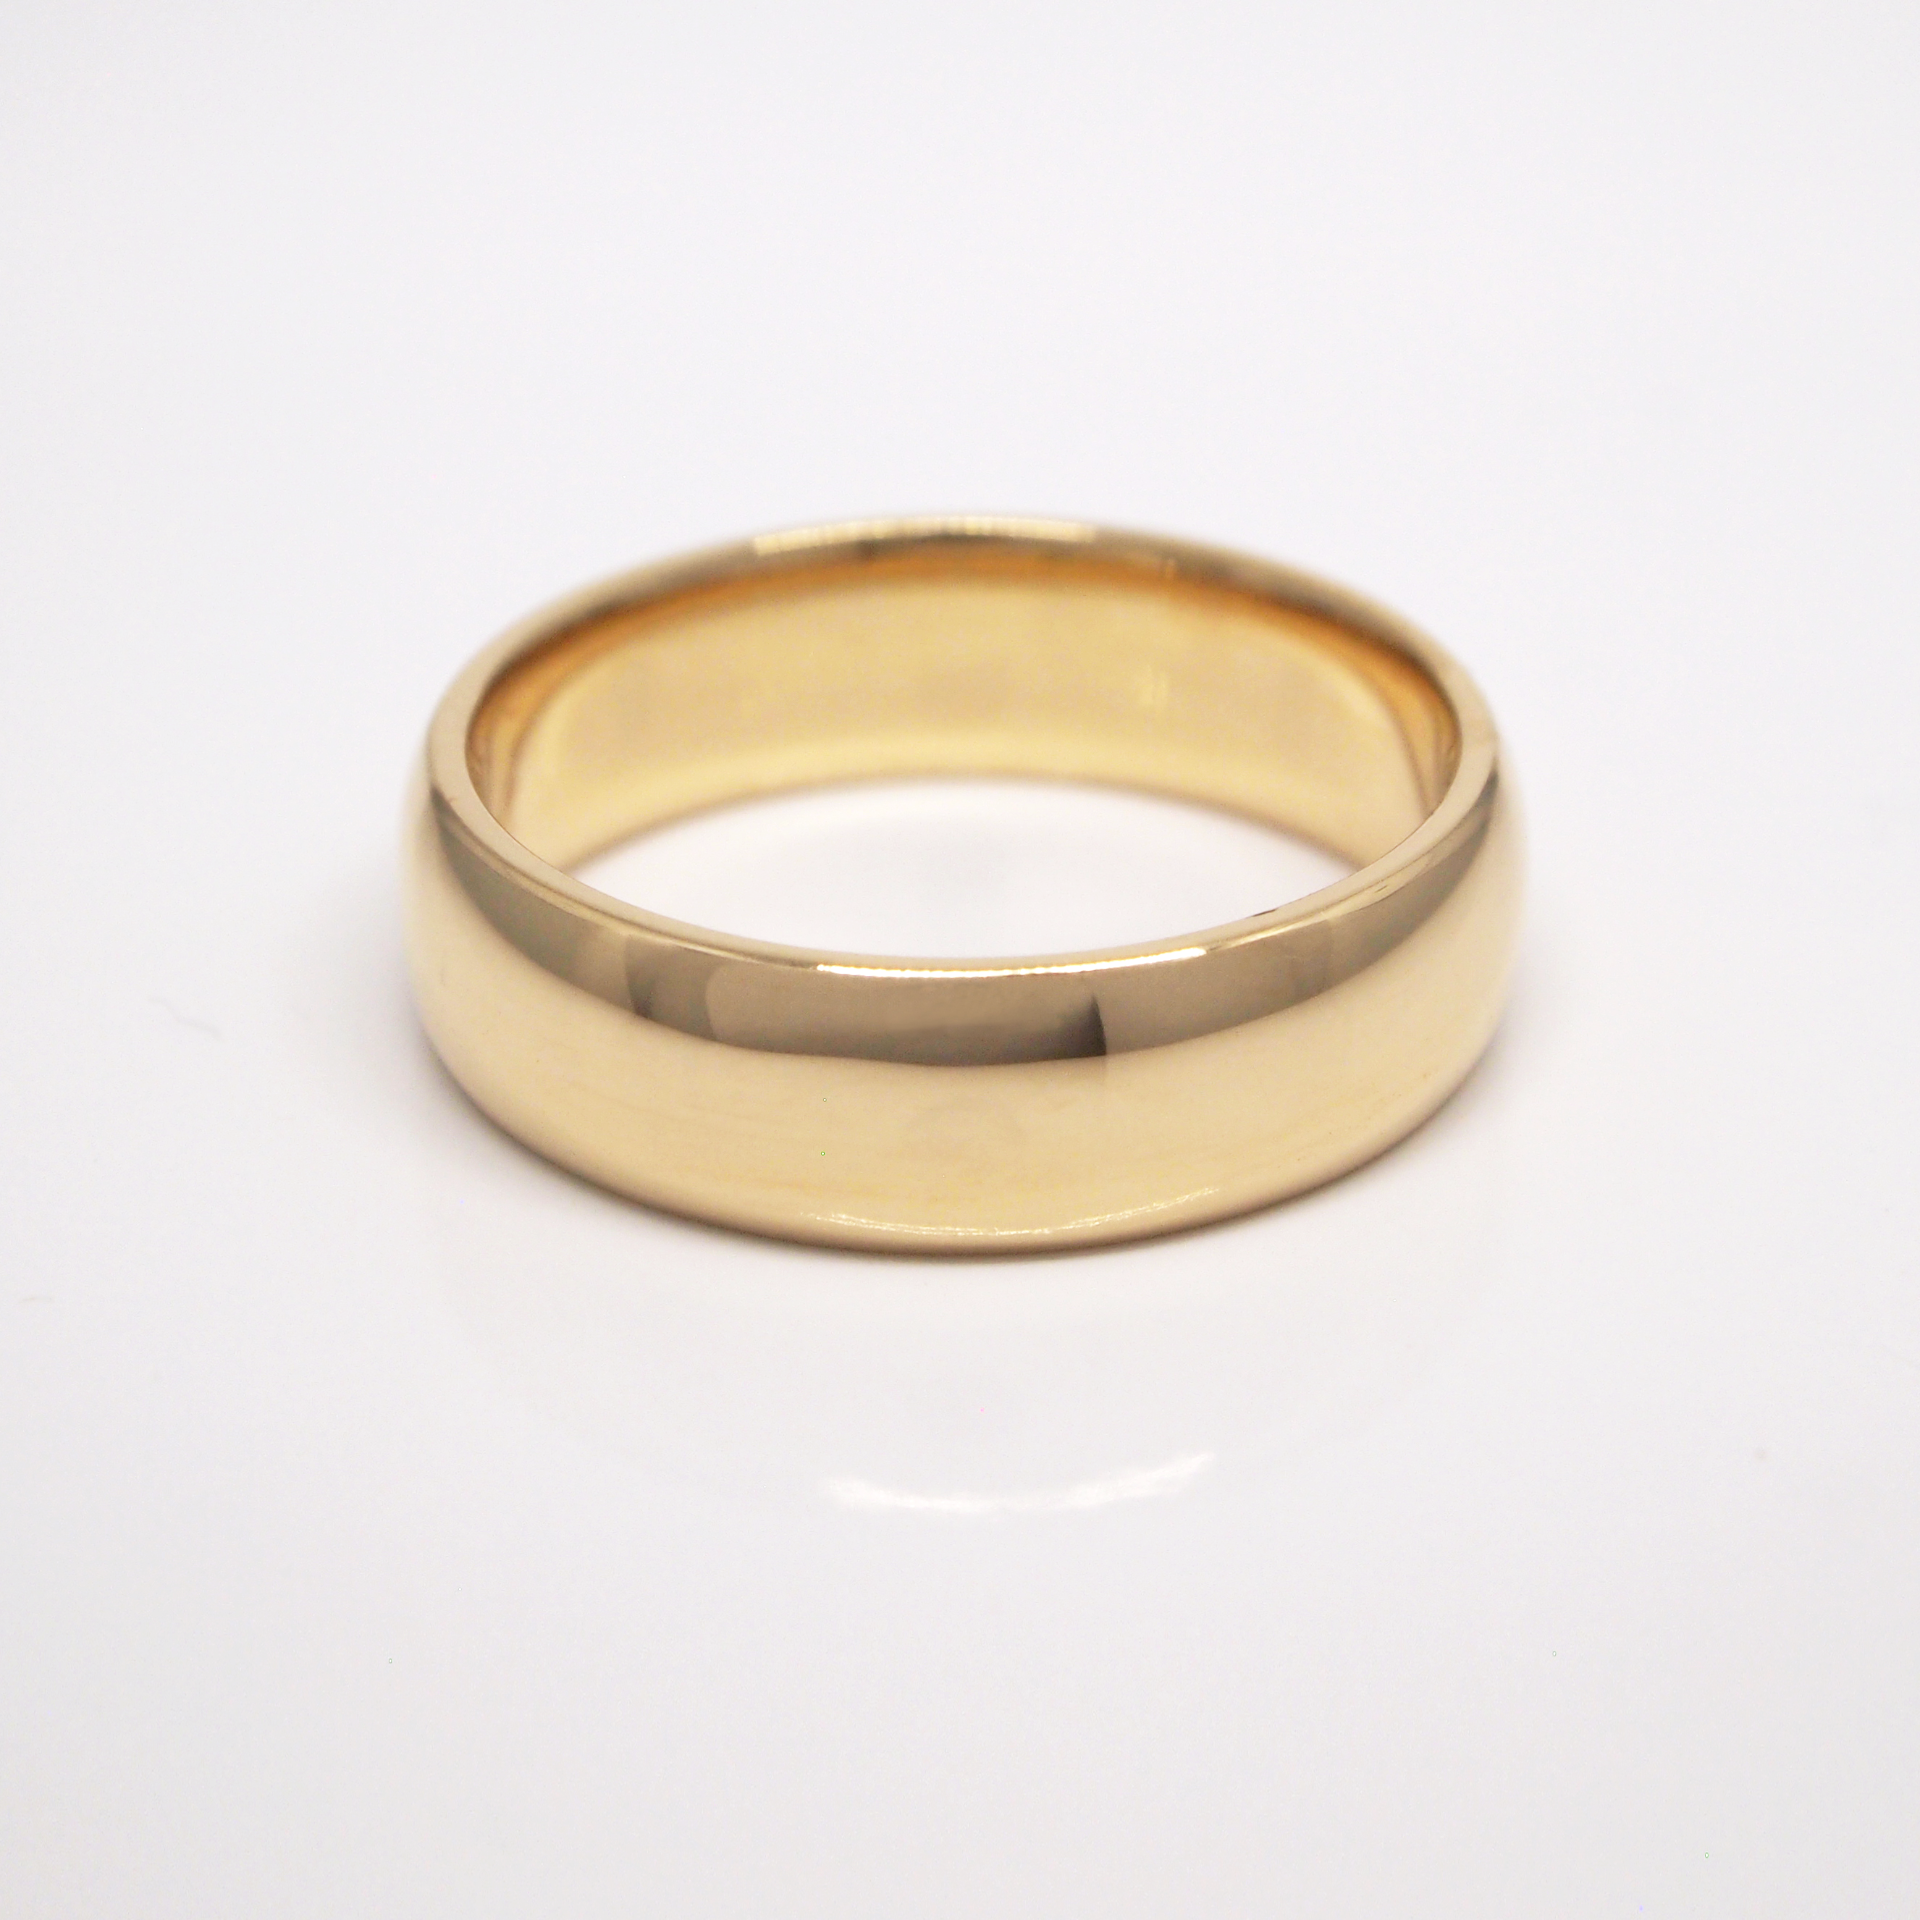 14K yellow gold regular weight 6mm domed wedding band featuring high polish finish.